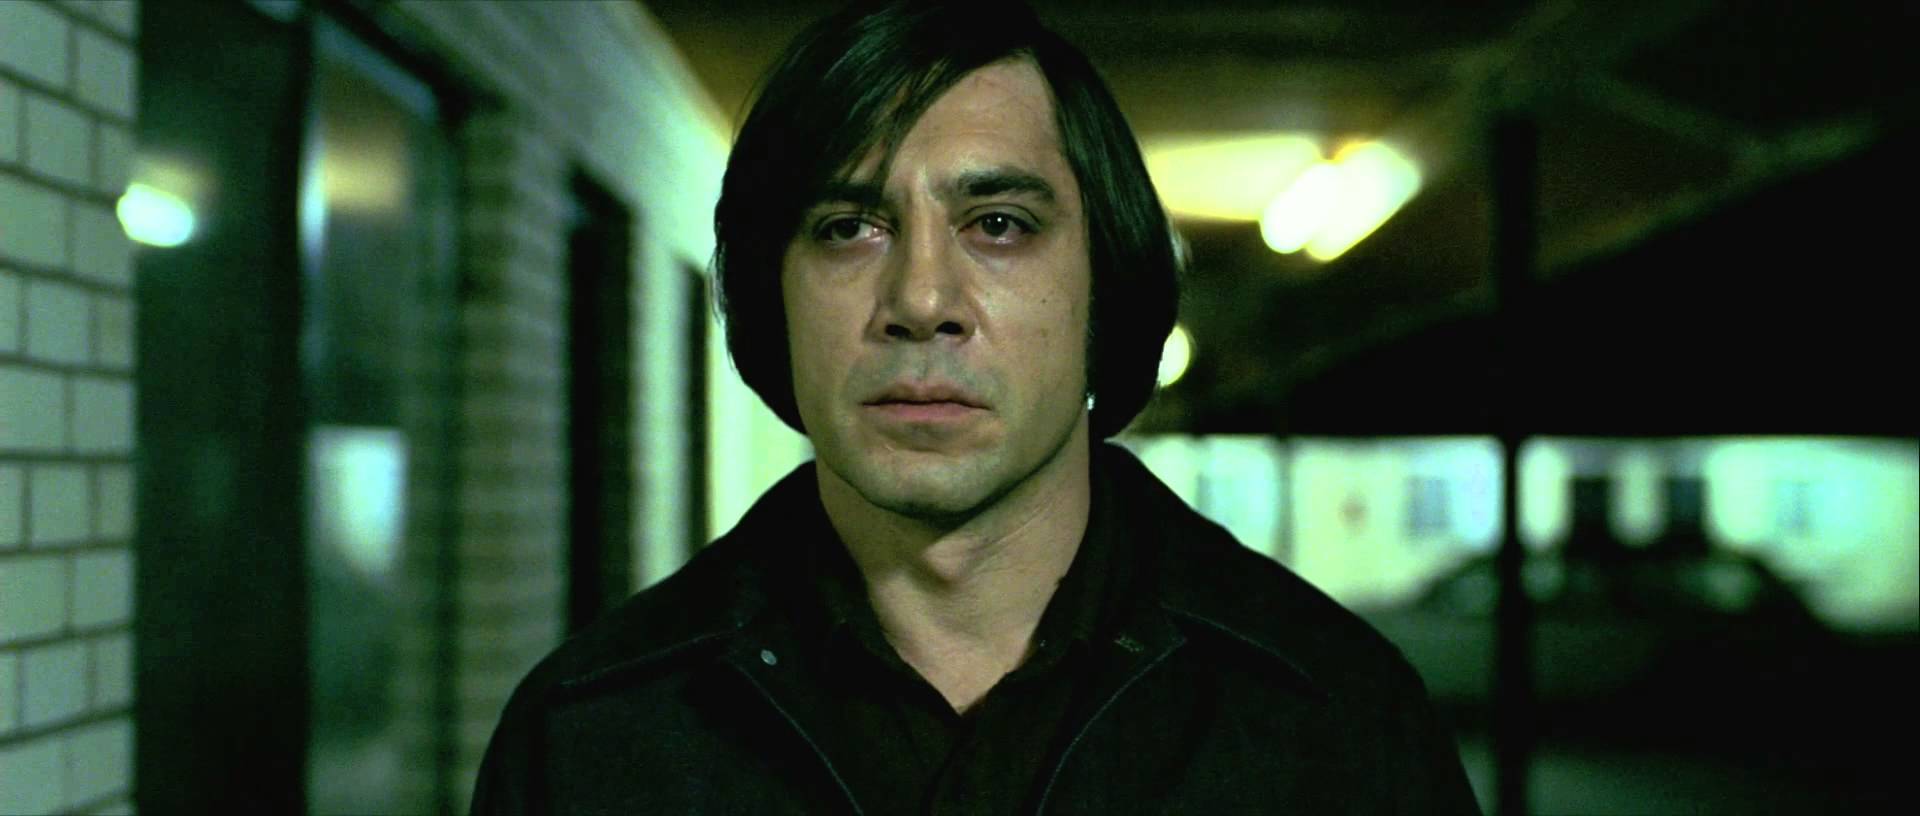 No Country For Old Men wallpaper, Movie, HQ No Country For Old Men pictureK Wallpaper 2019